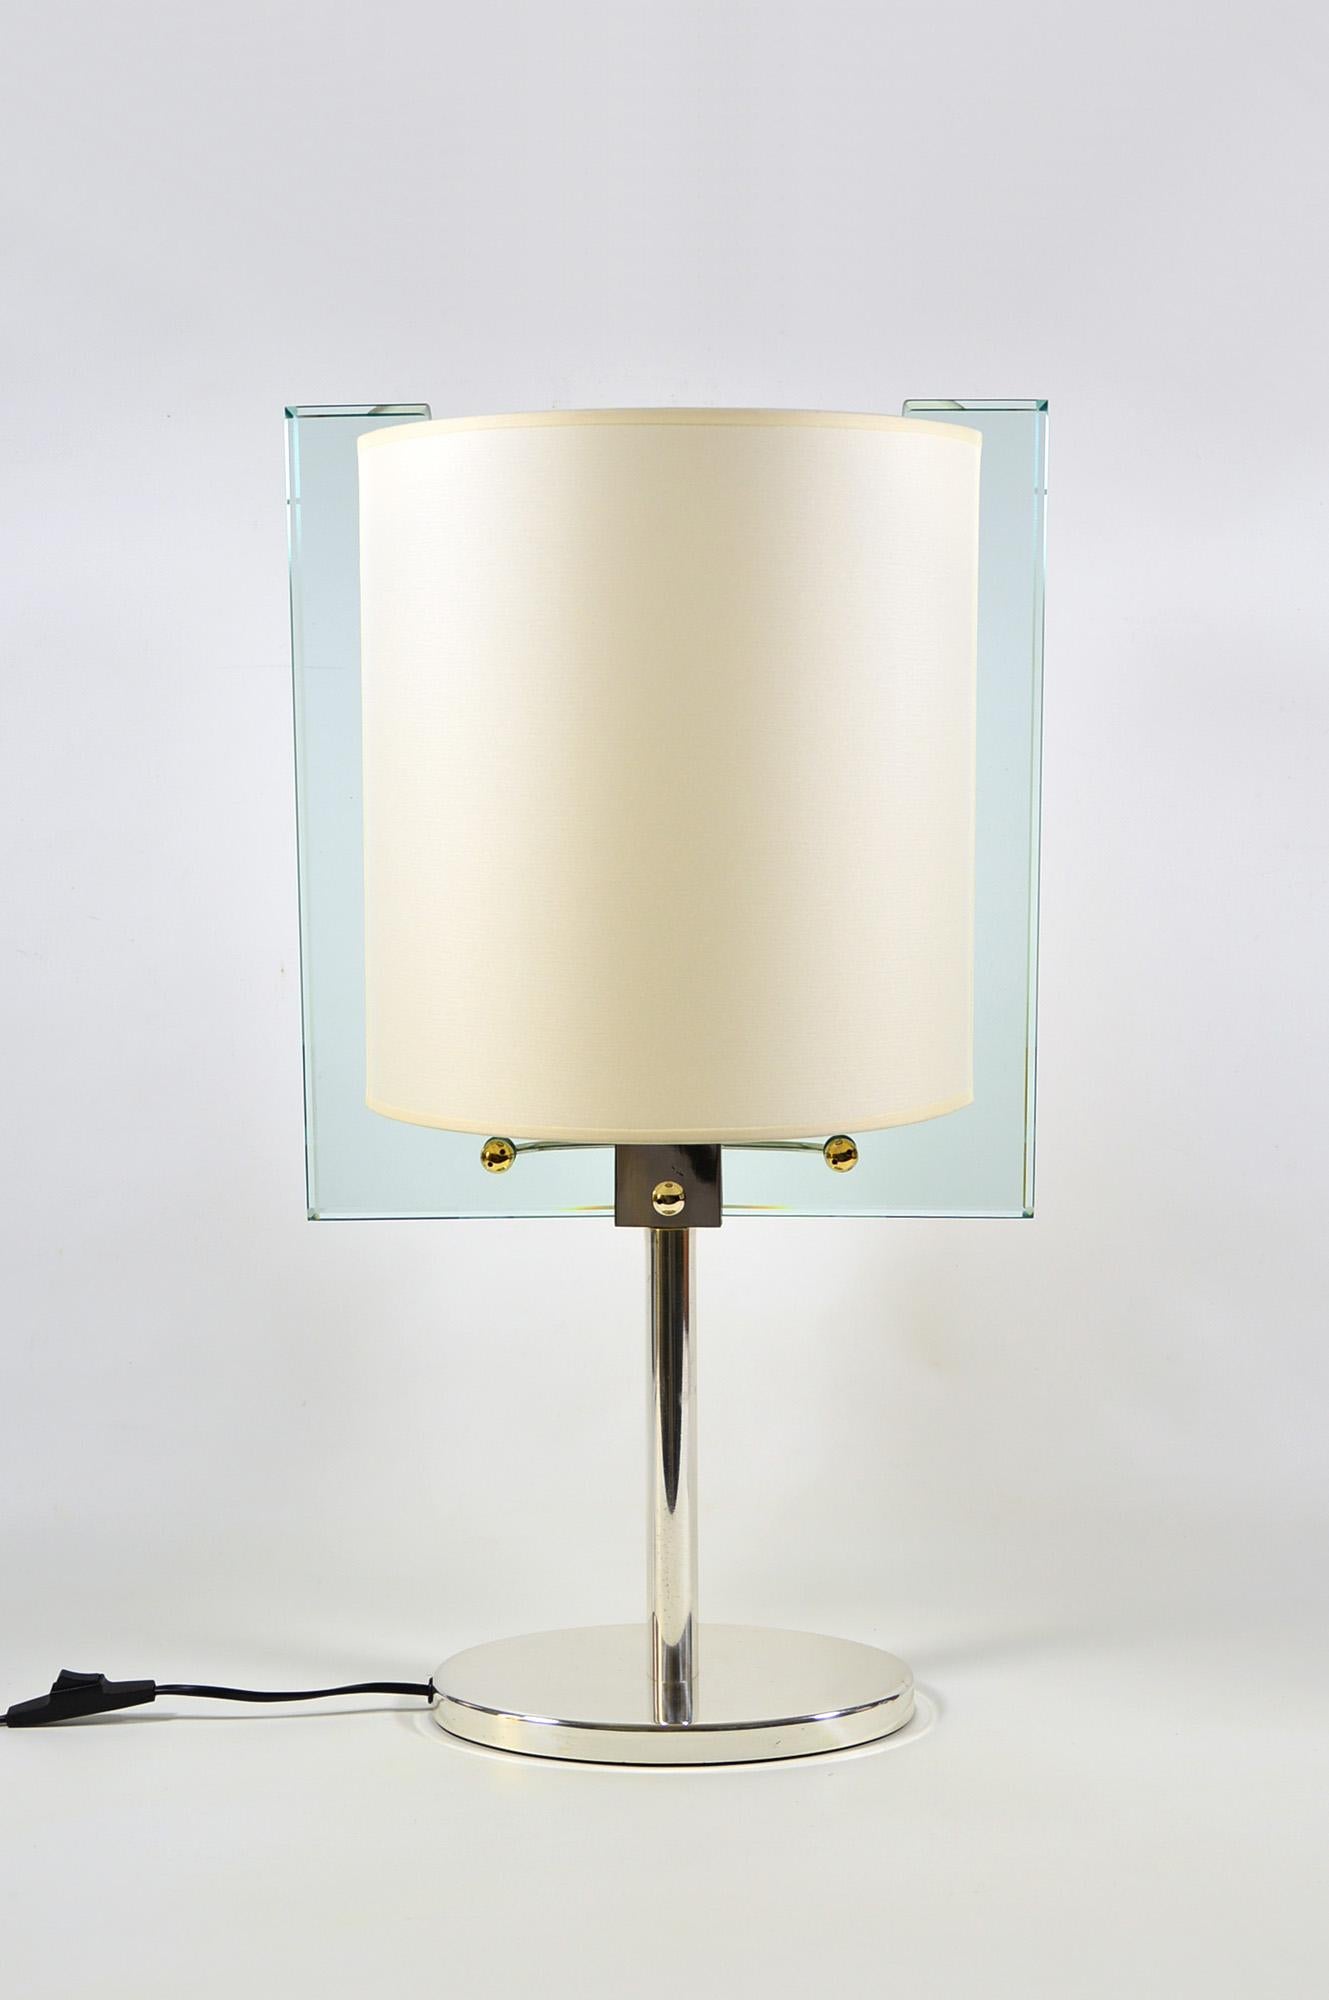 Table lamp model 2833 designed, circa 1990 by Nathalie Grenon for Fontana Arte, with a silver plated brass body and a unique shade made of fabric and thick crystal. 
It carries four bulbs with E14 screw sockets.
In very good condition, with minor